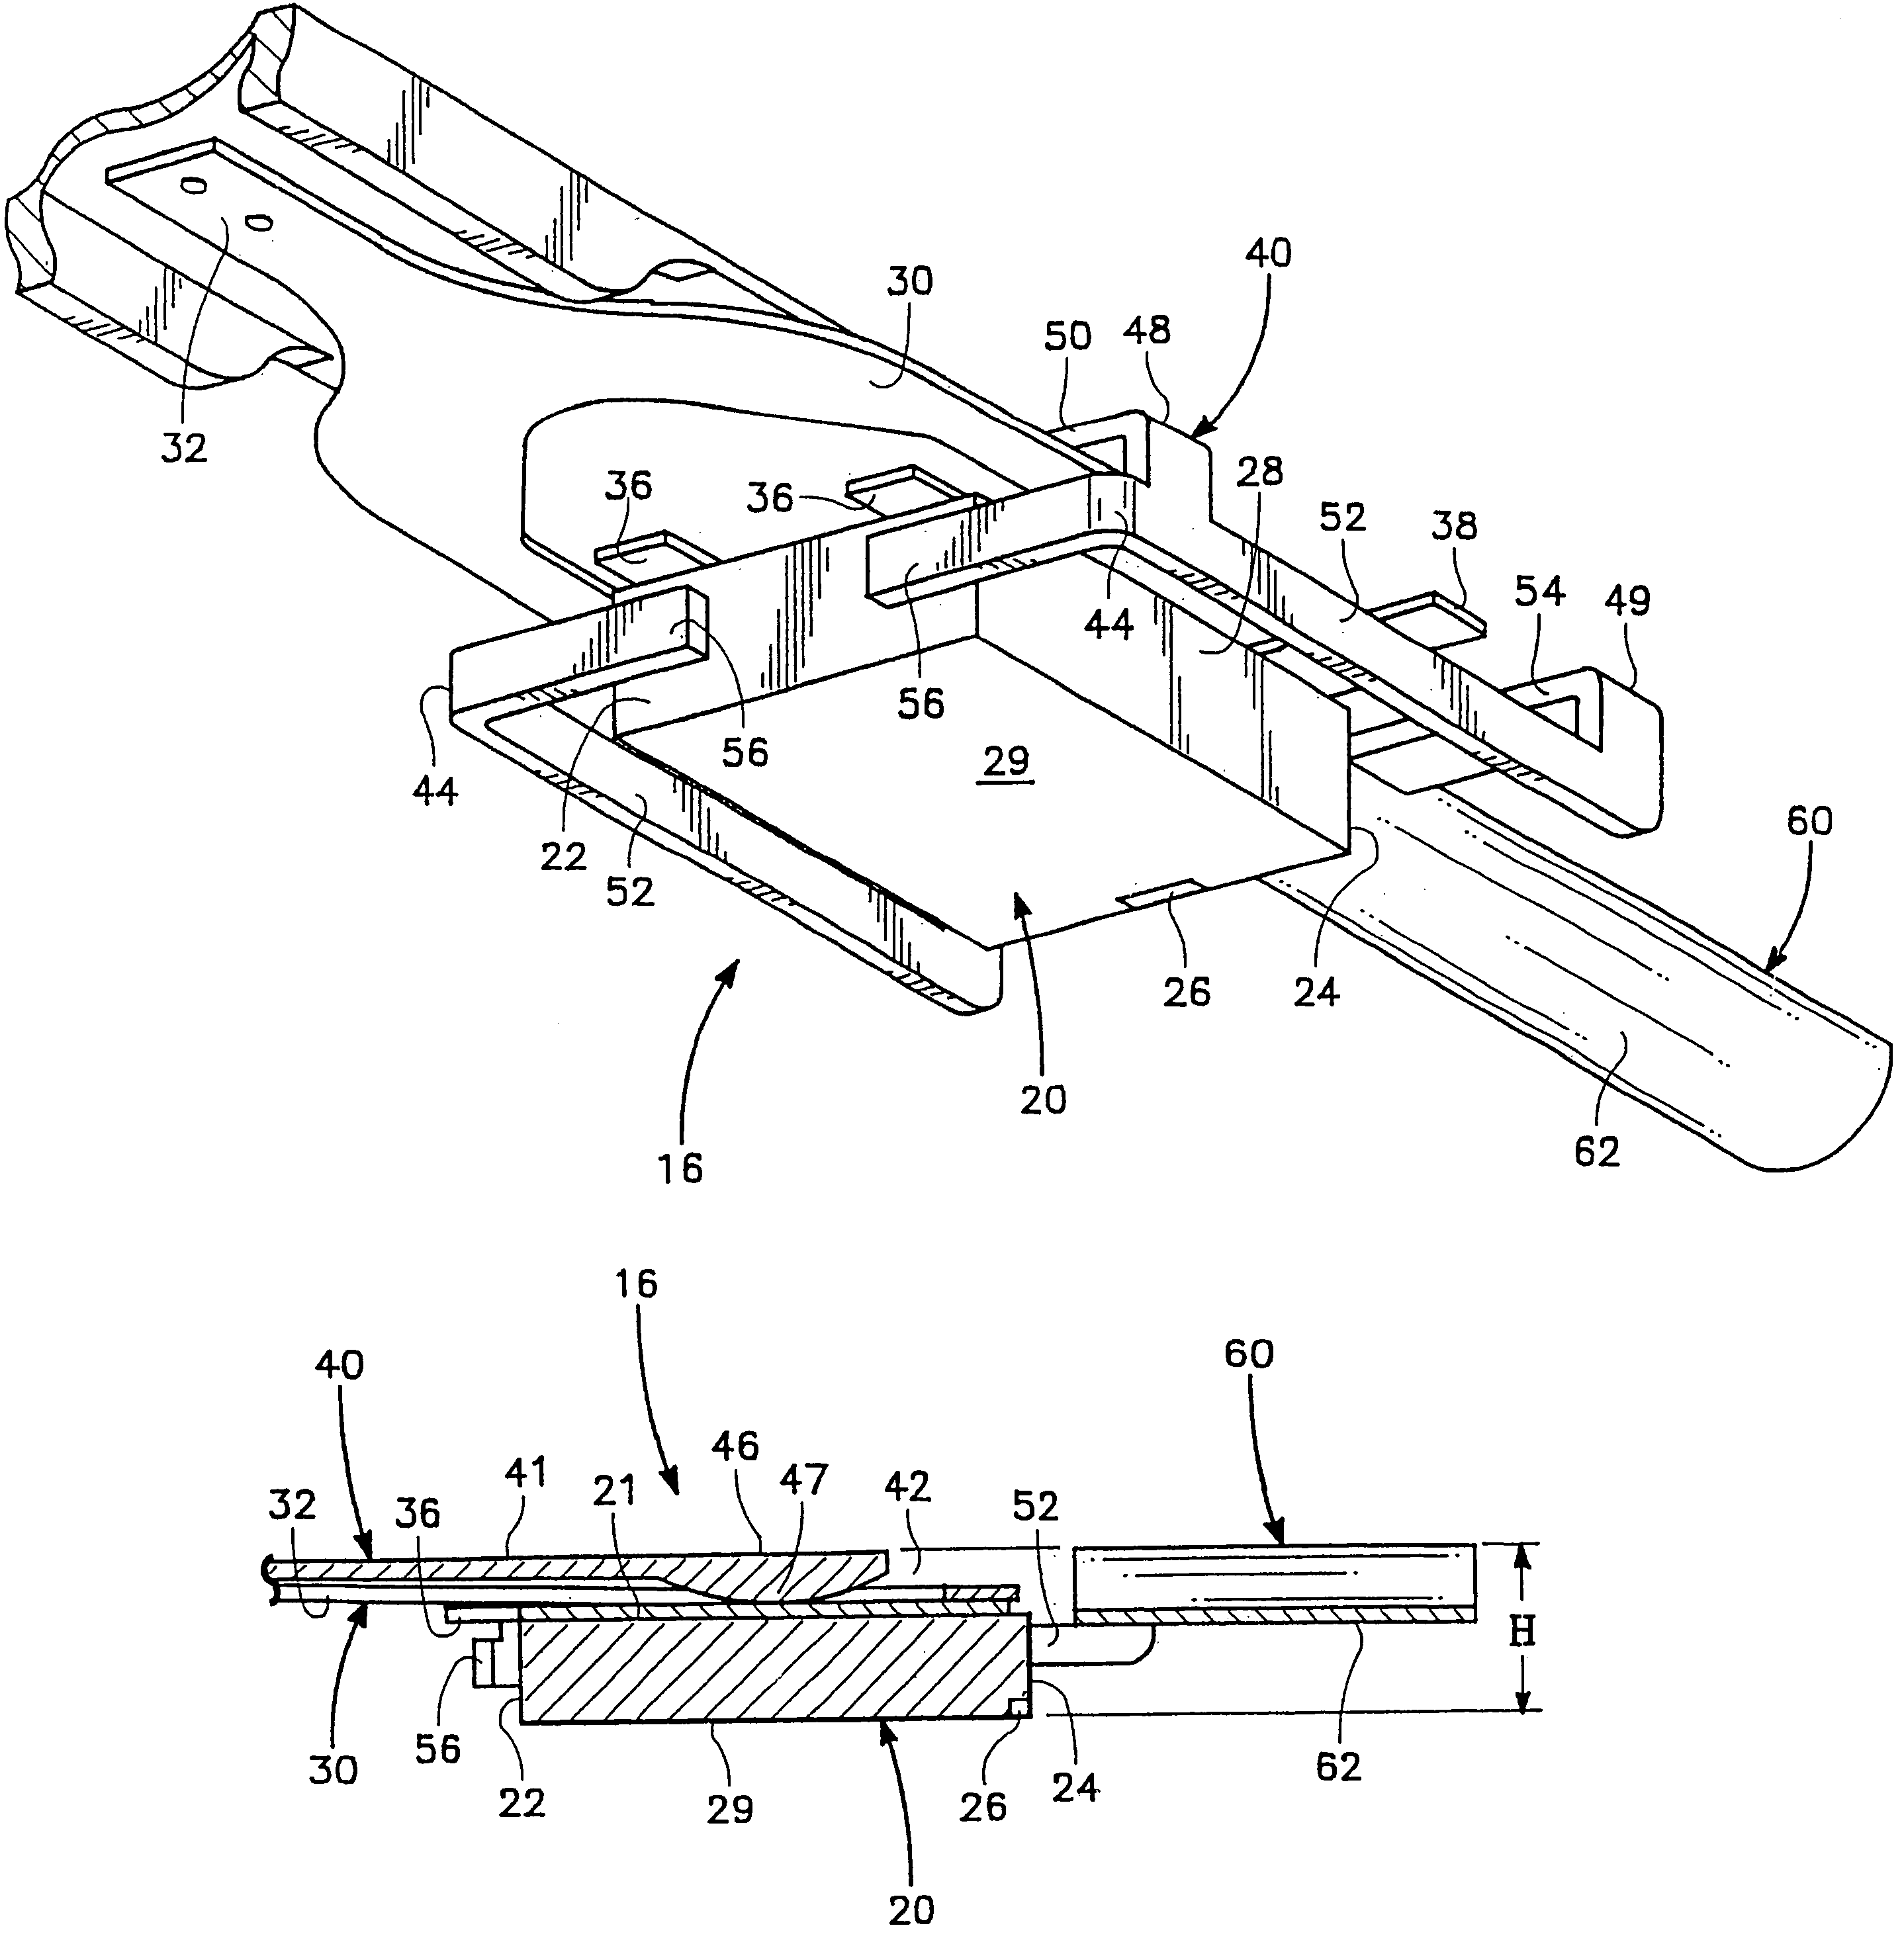 Low profile head gimbal assembly with shock limiting and load/unload capability